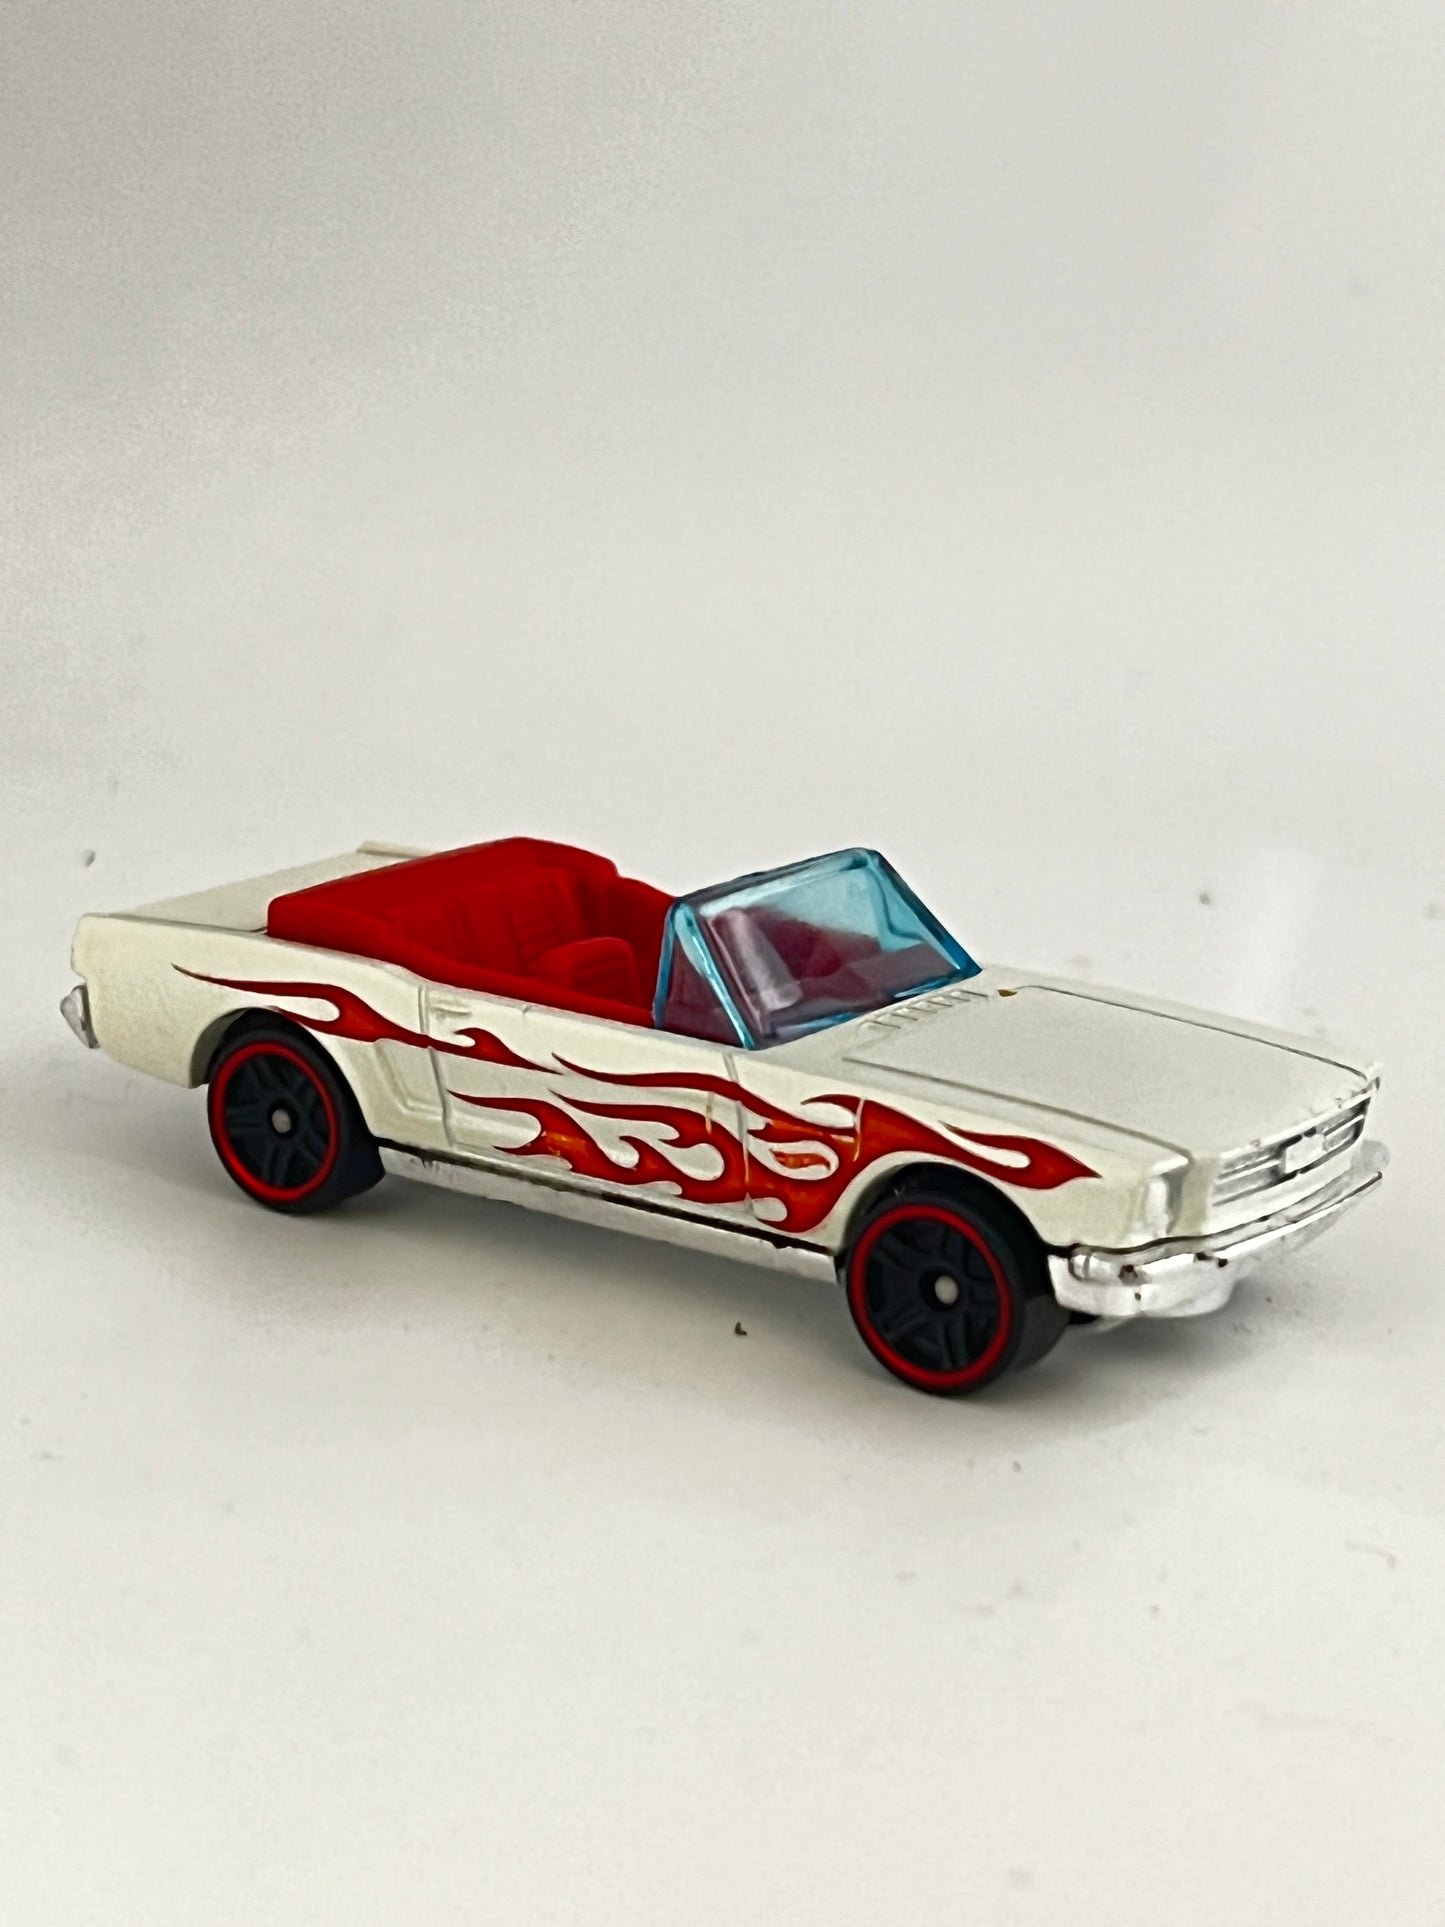 UNCARDED - 65 MUSTANG CONVERTIBLE